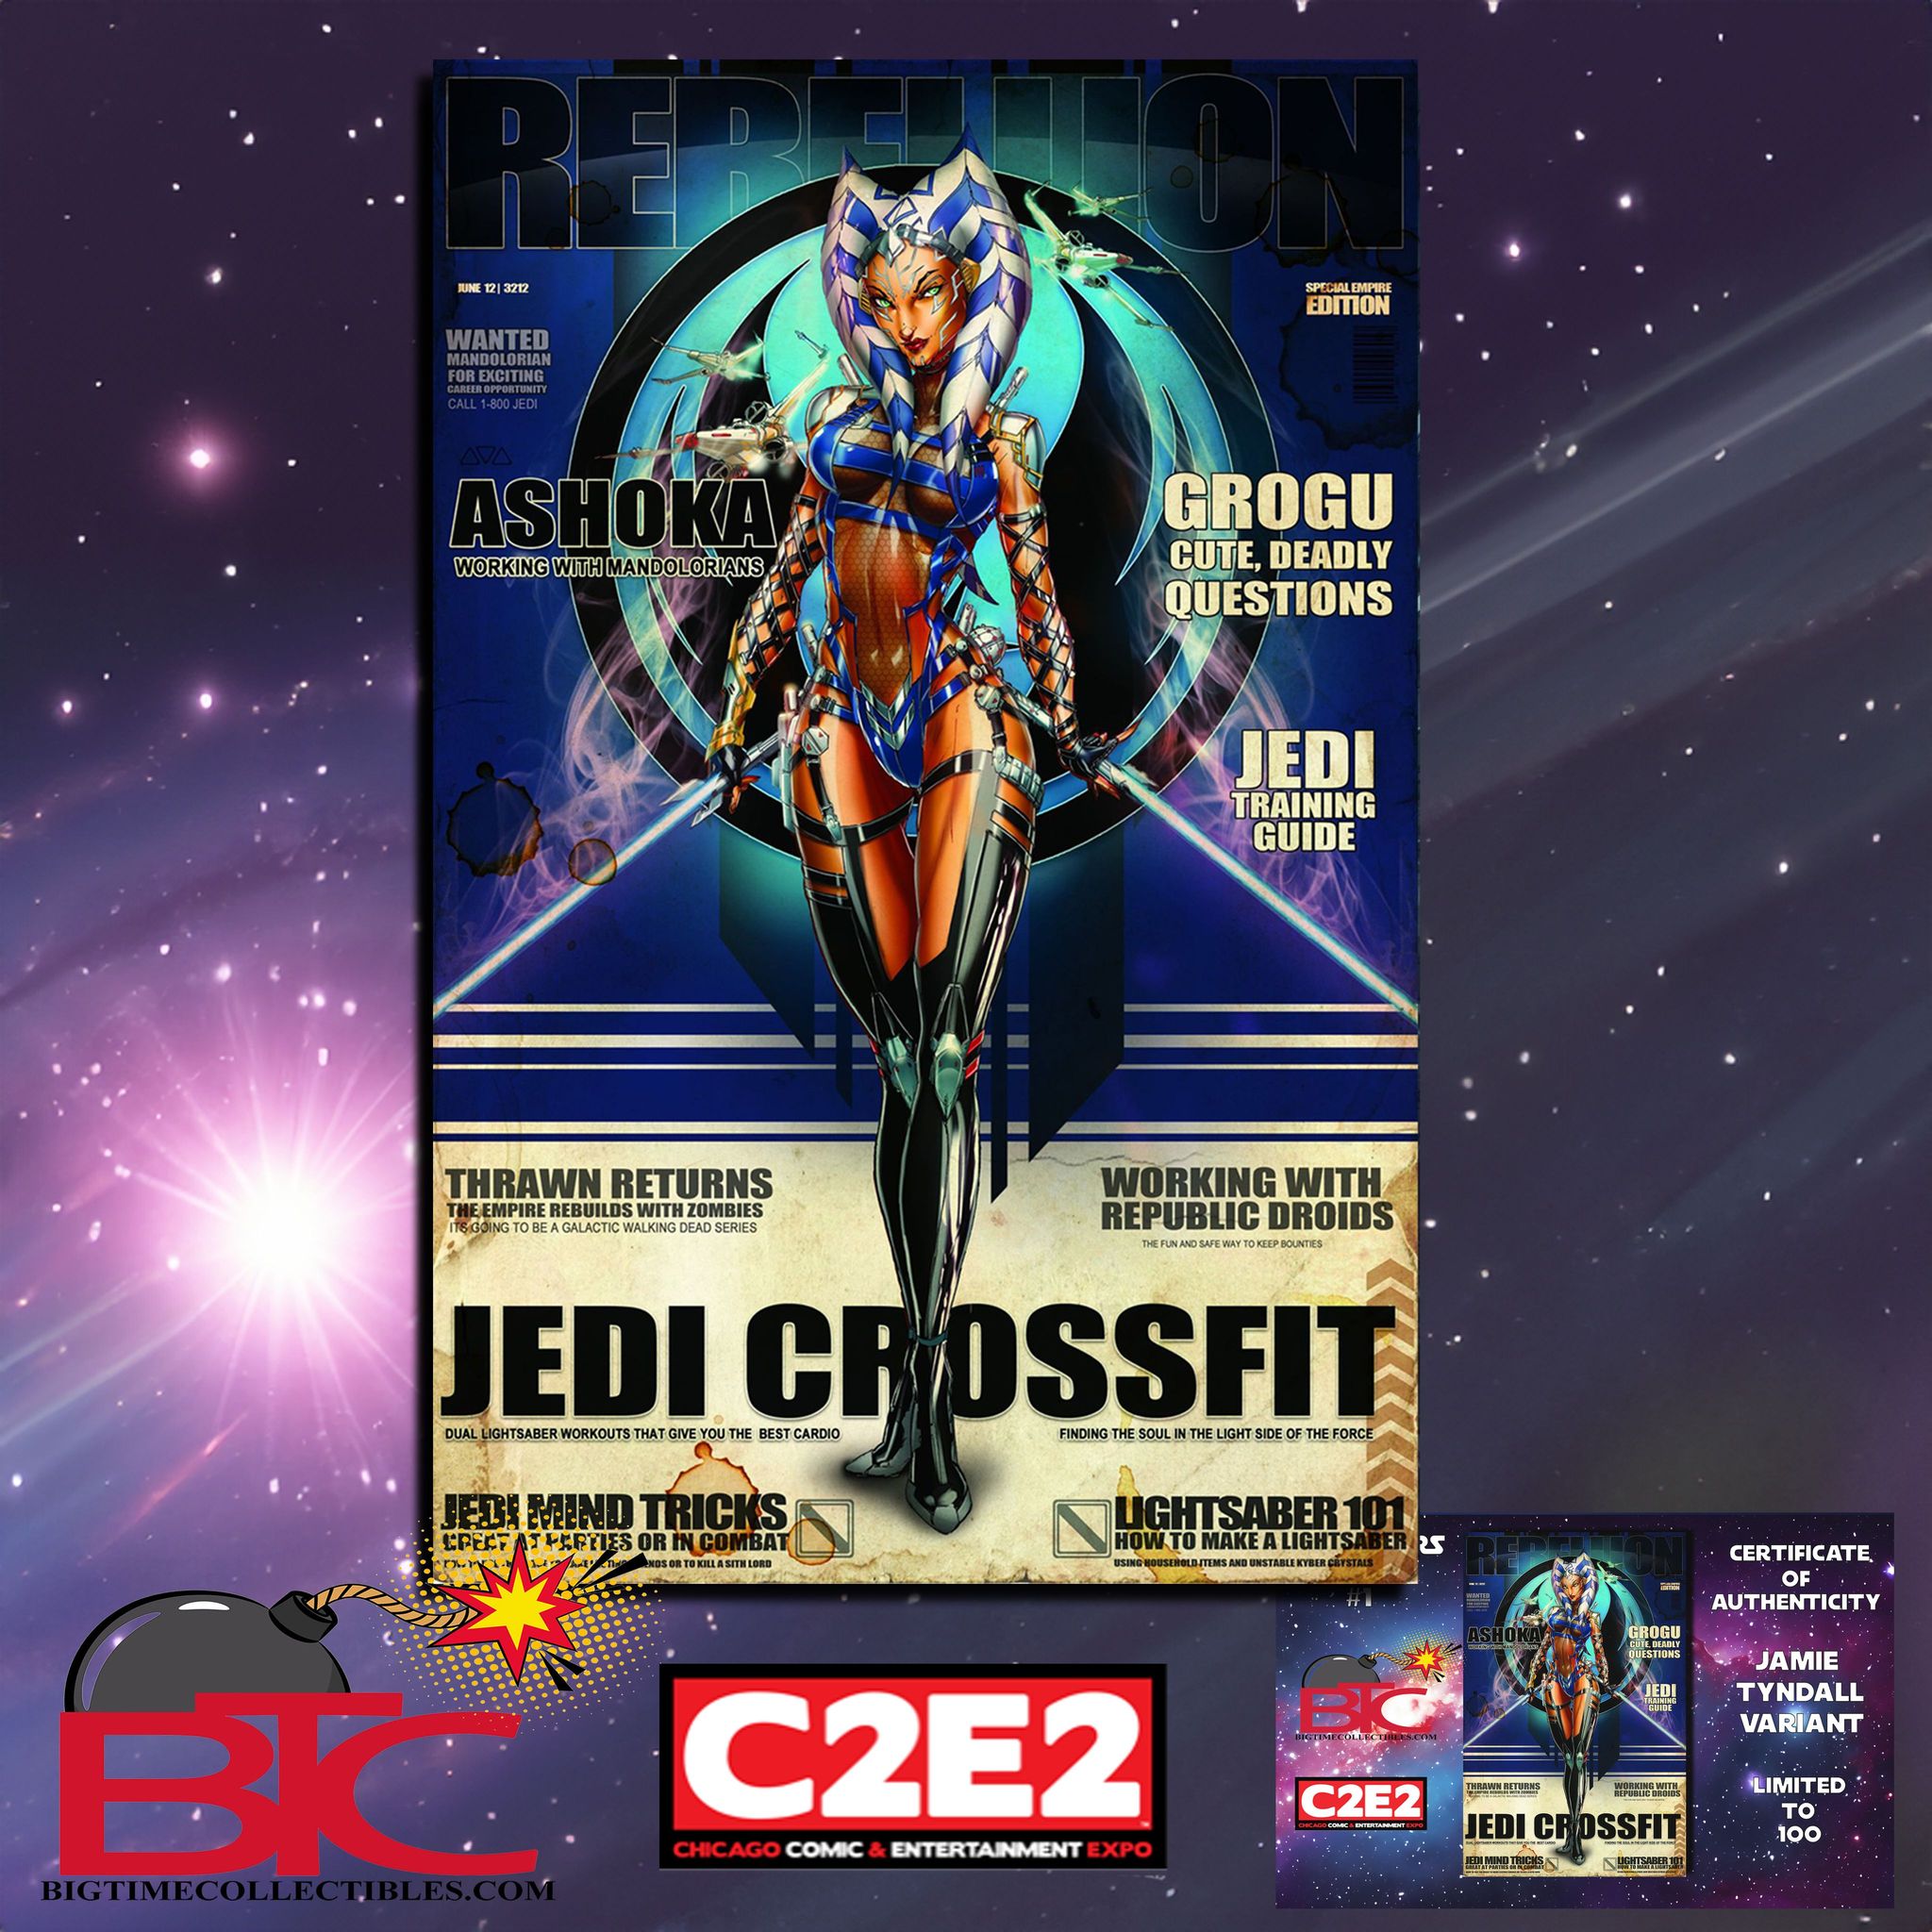 DAUGHTERS OF EDEN #1 JAMIE TYNDALL C2E2 JEDI CROSSFIT EXCLUSIVE VARIANT LIMITED TO 100 W/COA